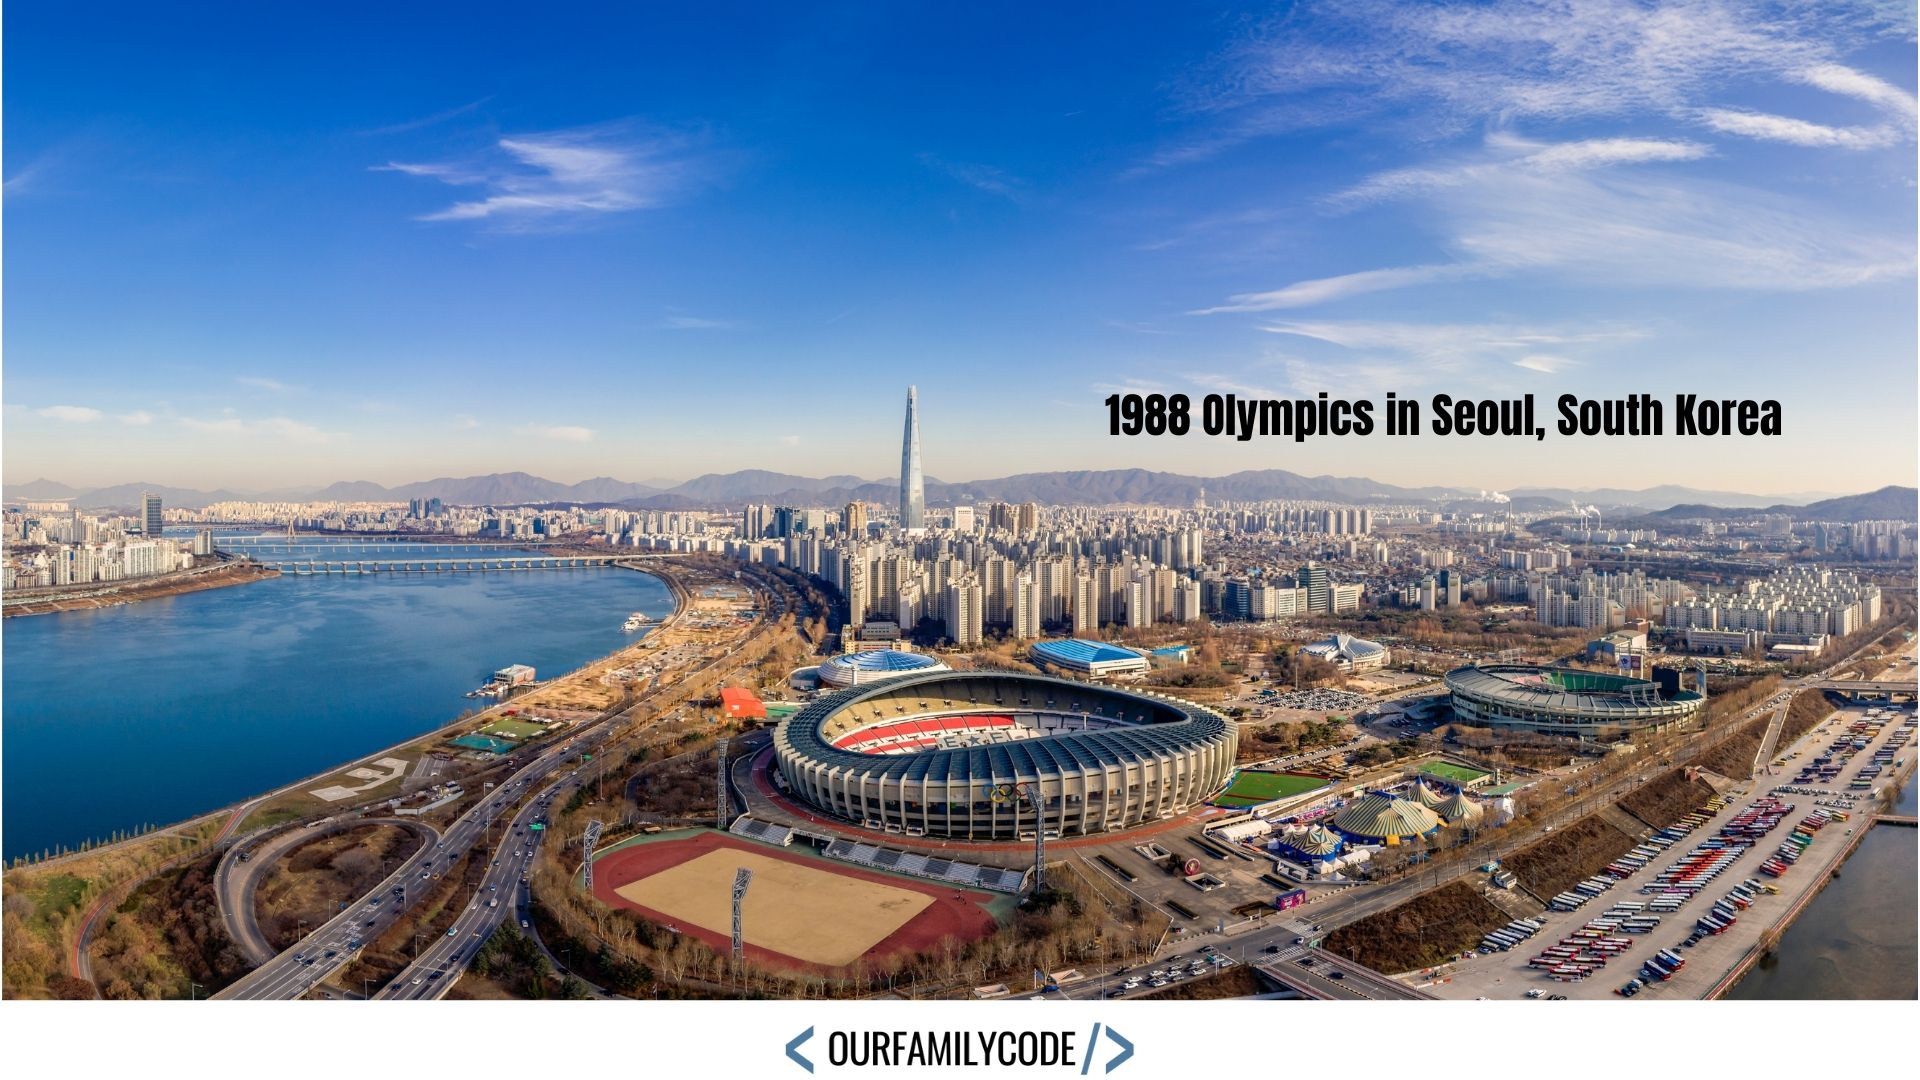 A picture of the olympic stadium in Seoul, South Korea.